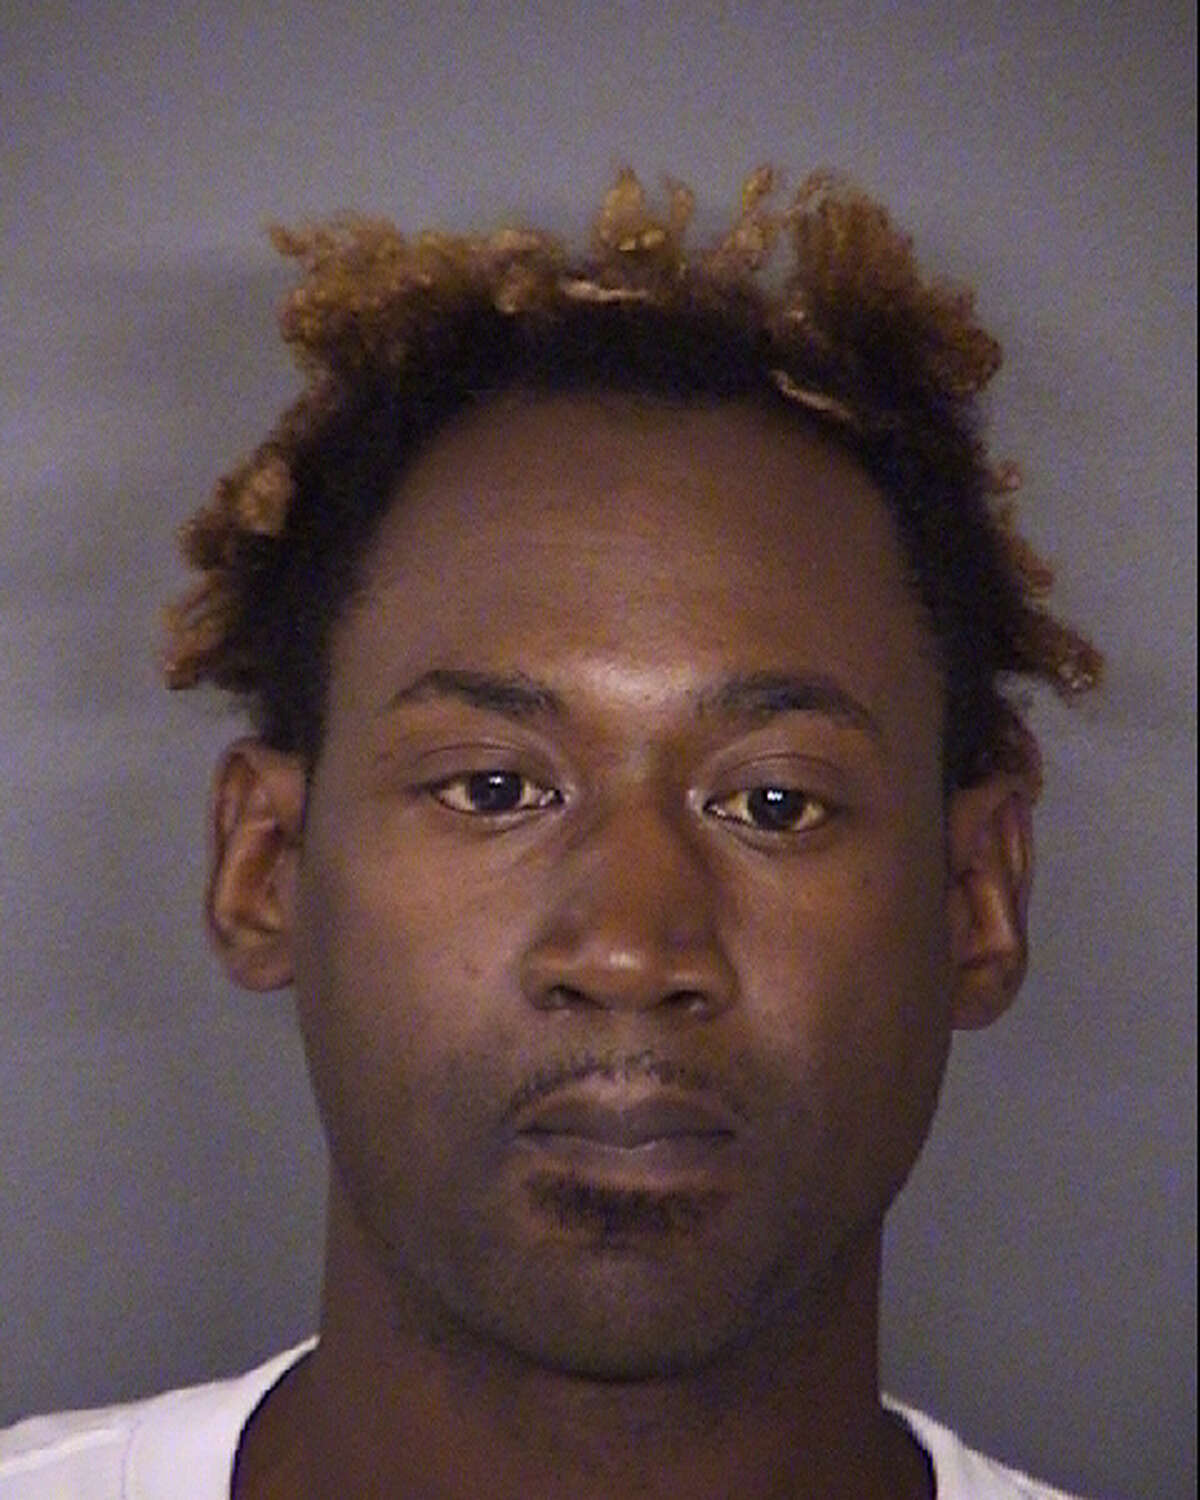 1.  Otis Tyrone McKane, 31, was arrested and charged with capital murder Nov. 21, 2016. He is accused of killing SAPD Det. Benjamin Marconi, 50, on Nov. 20, 2016.